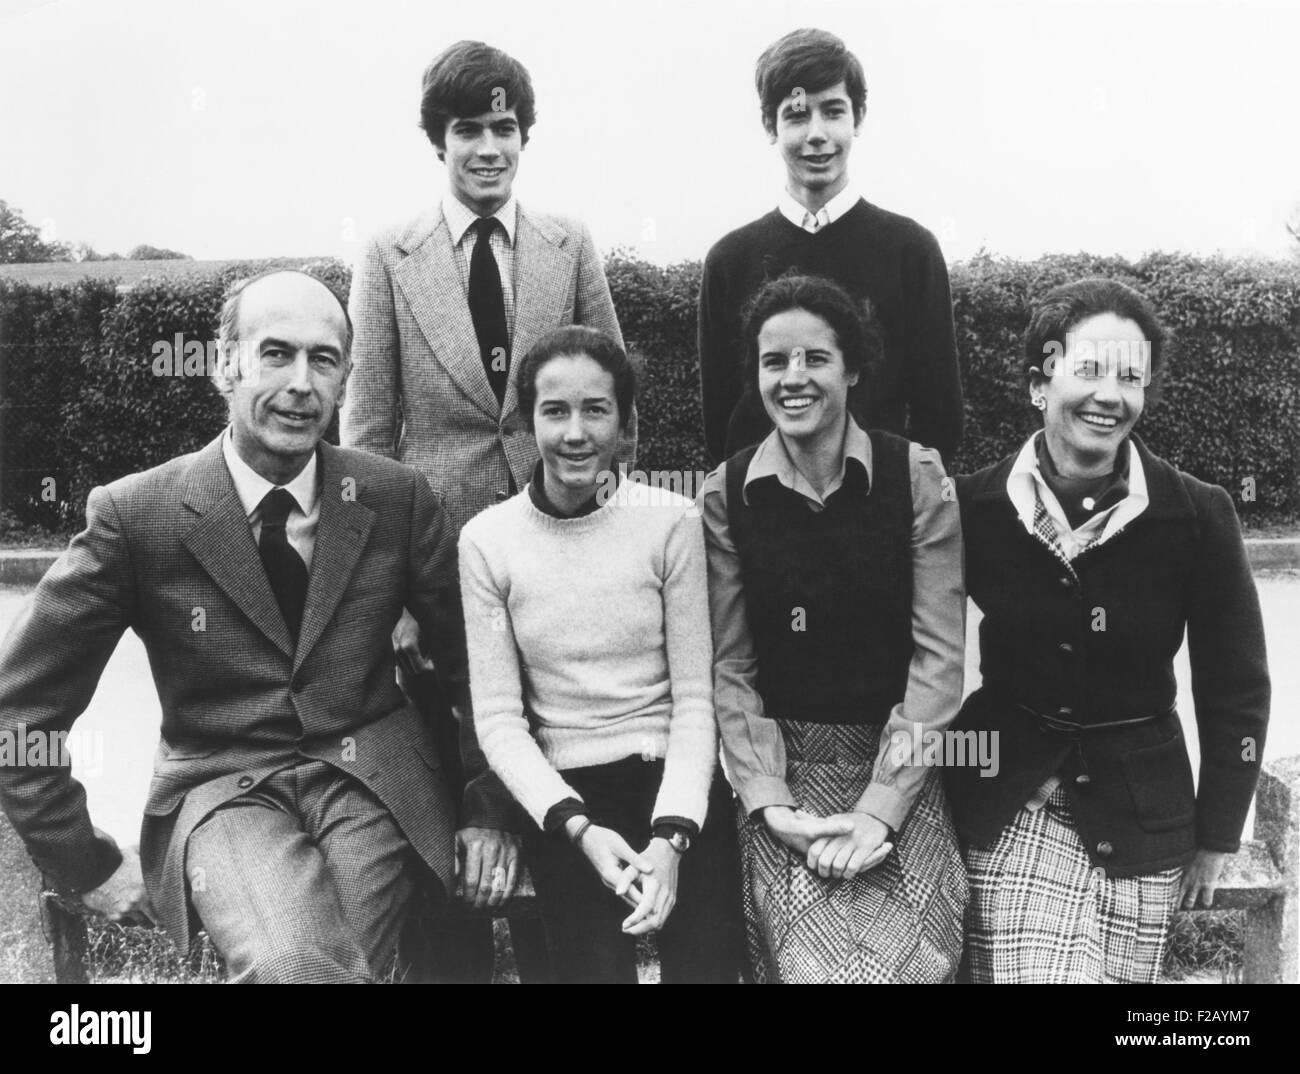 Presidents Valery Giscard d'Estaing with his family. Seated L-R: Giscard, Jacinte,Valérie-Anne, Anne-Aymone Giscard d'Estaing. Standing: Henri, Louis. Ca. 1976. (CSU 2015 9 754) Stock Photo